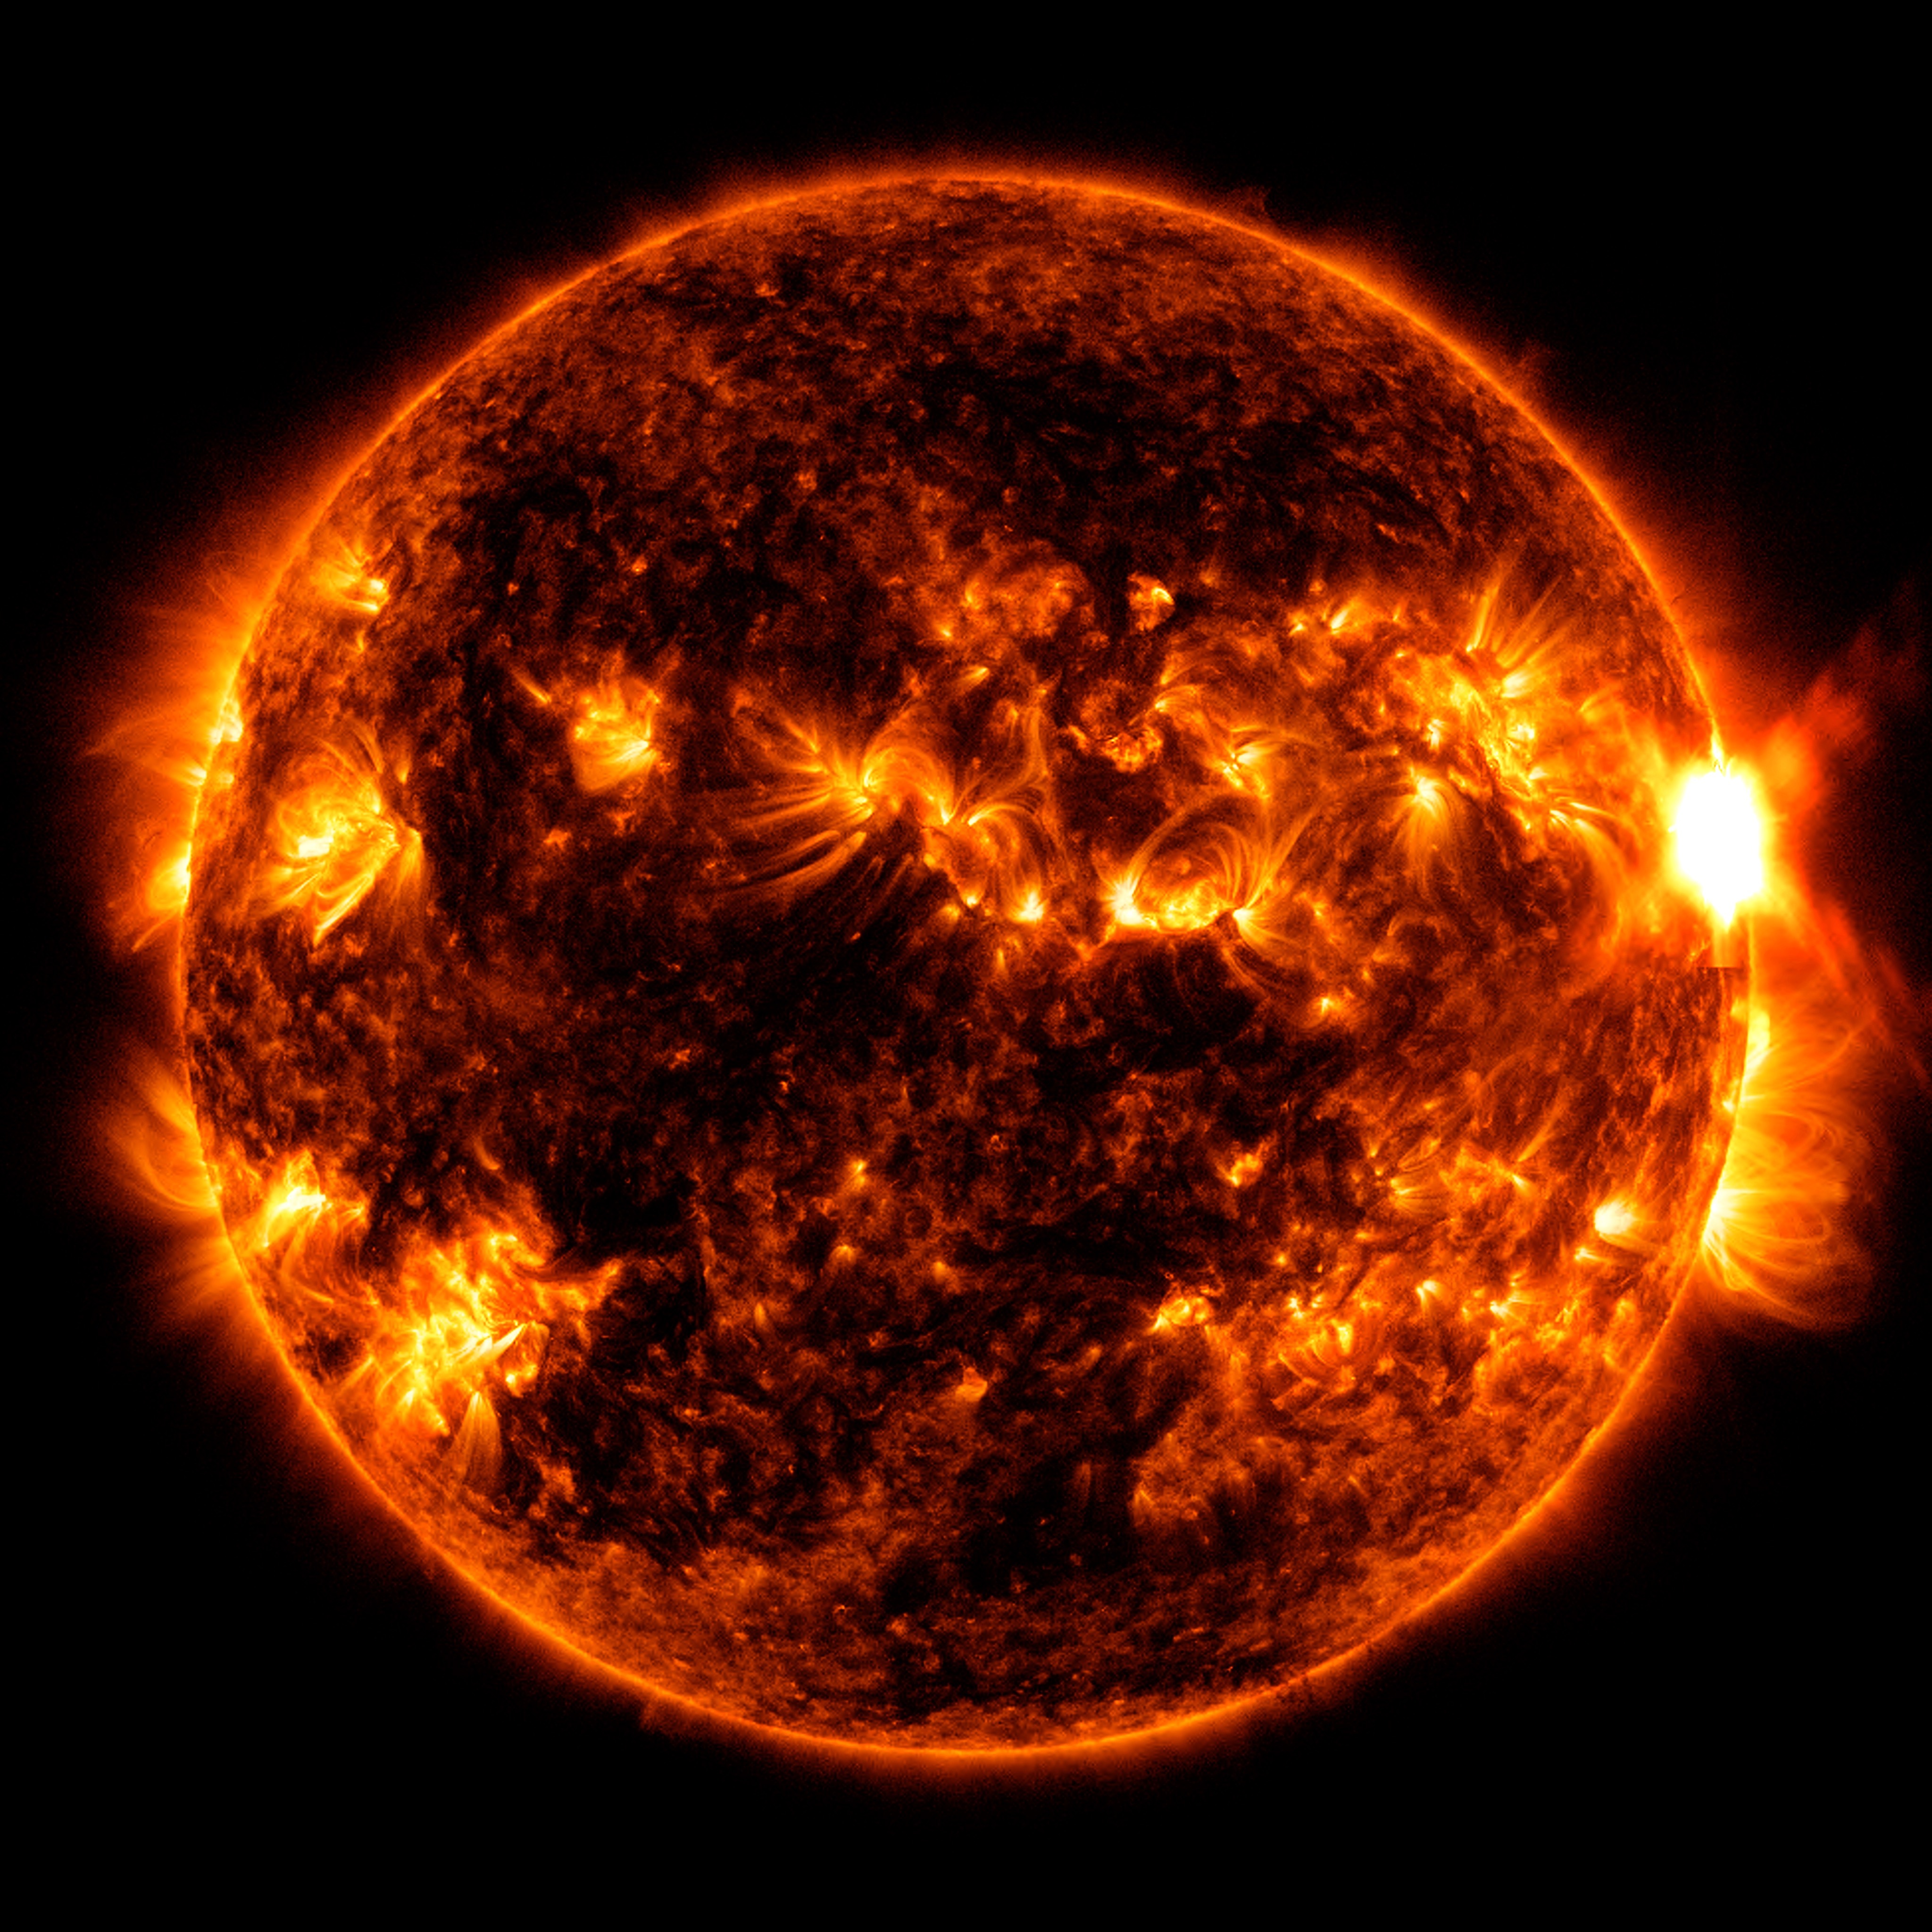 The Sun shown in red and orange, swirled with darker inactive areas and brighter active areas. On the right side of the Sun, there is a very bright region where the flare erupts.